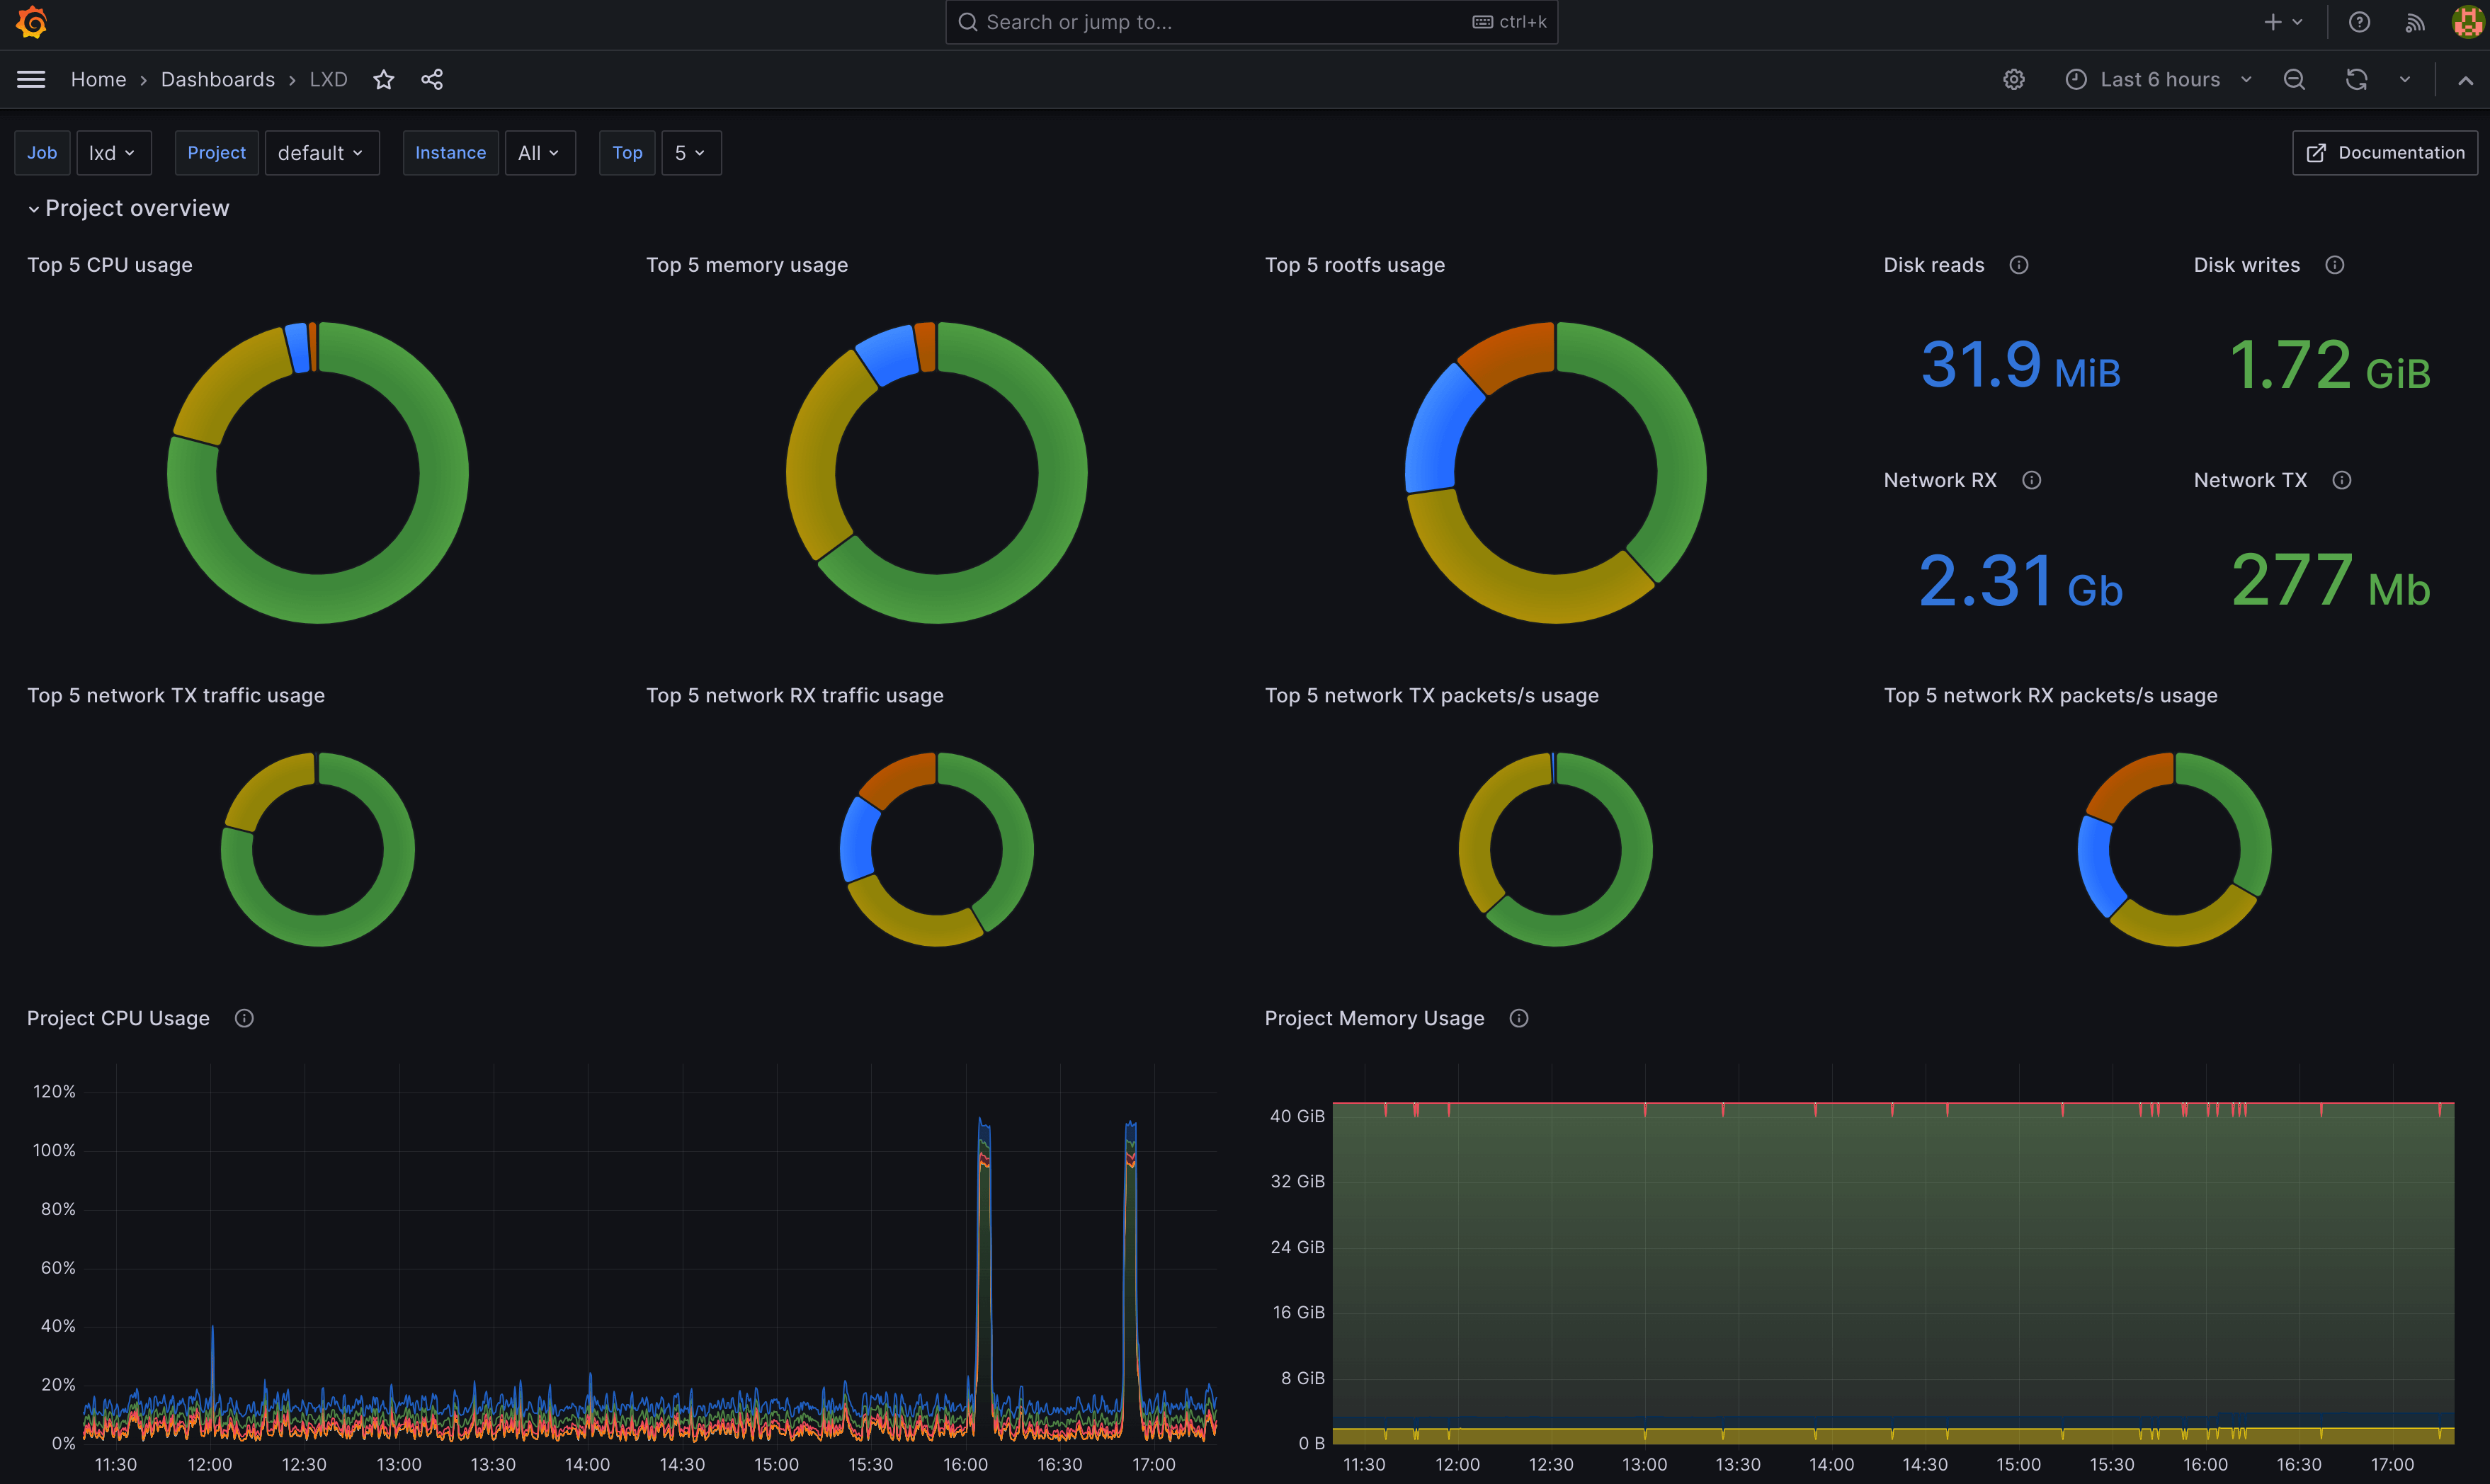 Resource overview in the LXD Grafana dashboard